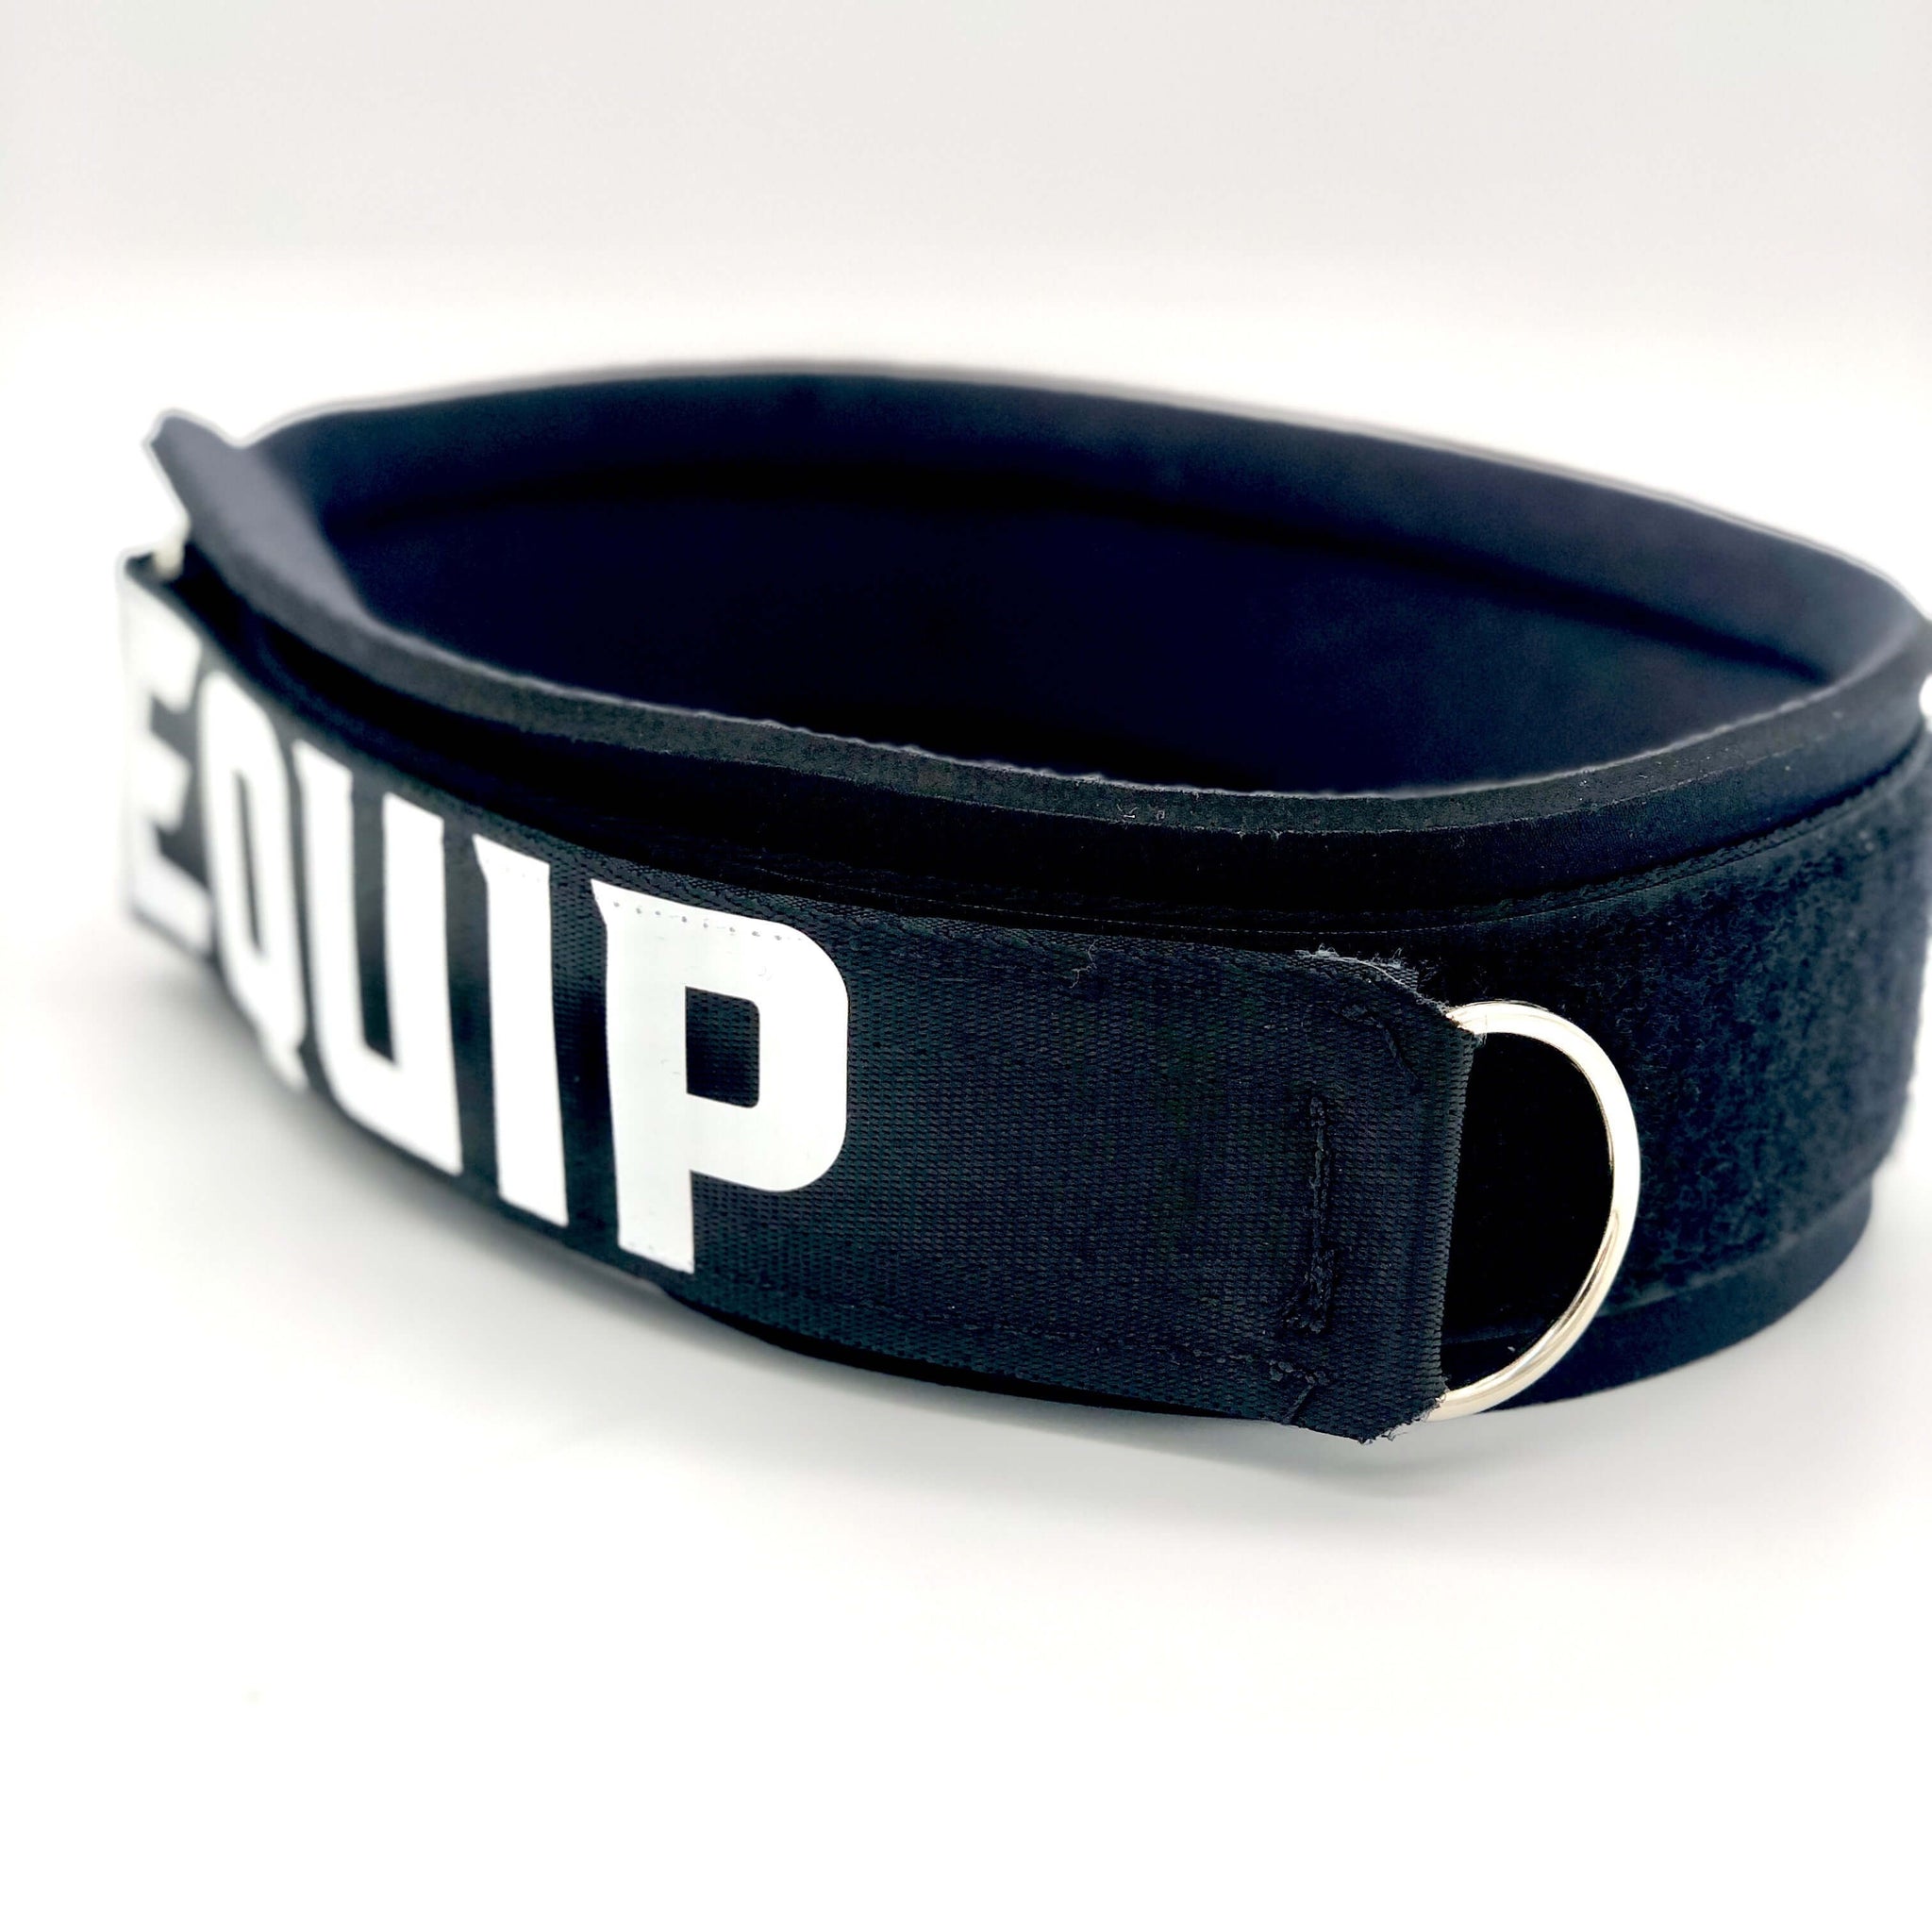 Angled slightly to the right showing D-Ring Large Leg Strap black with white lettering that reads Equip, on a white background.